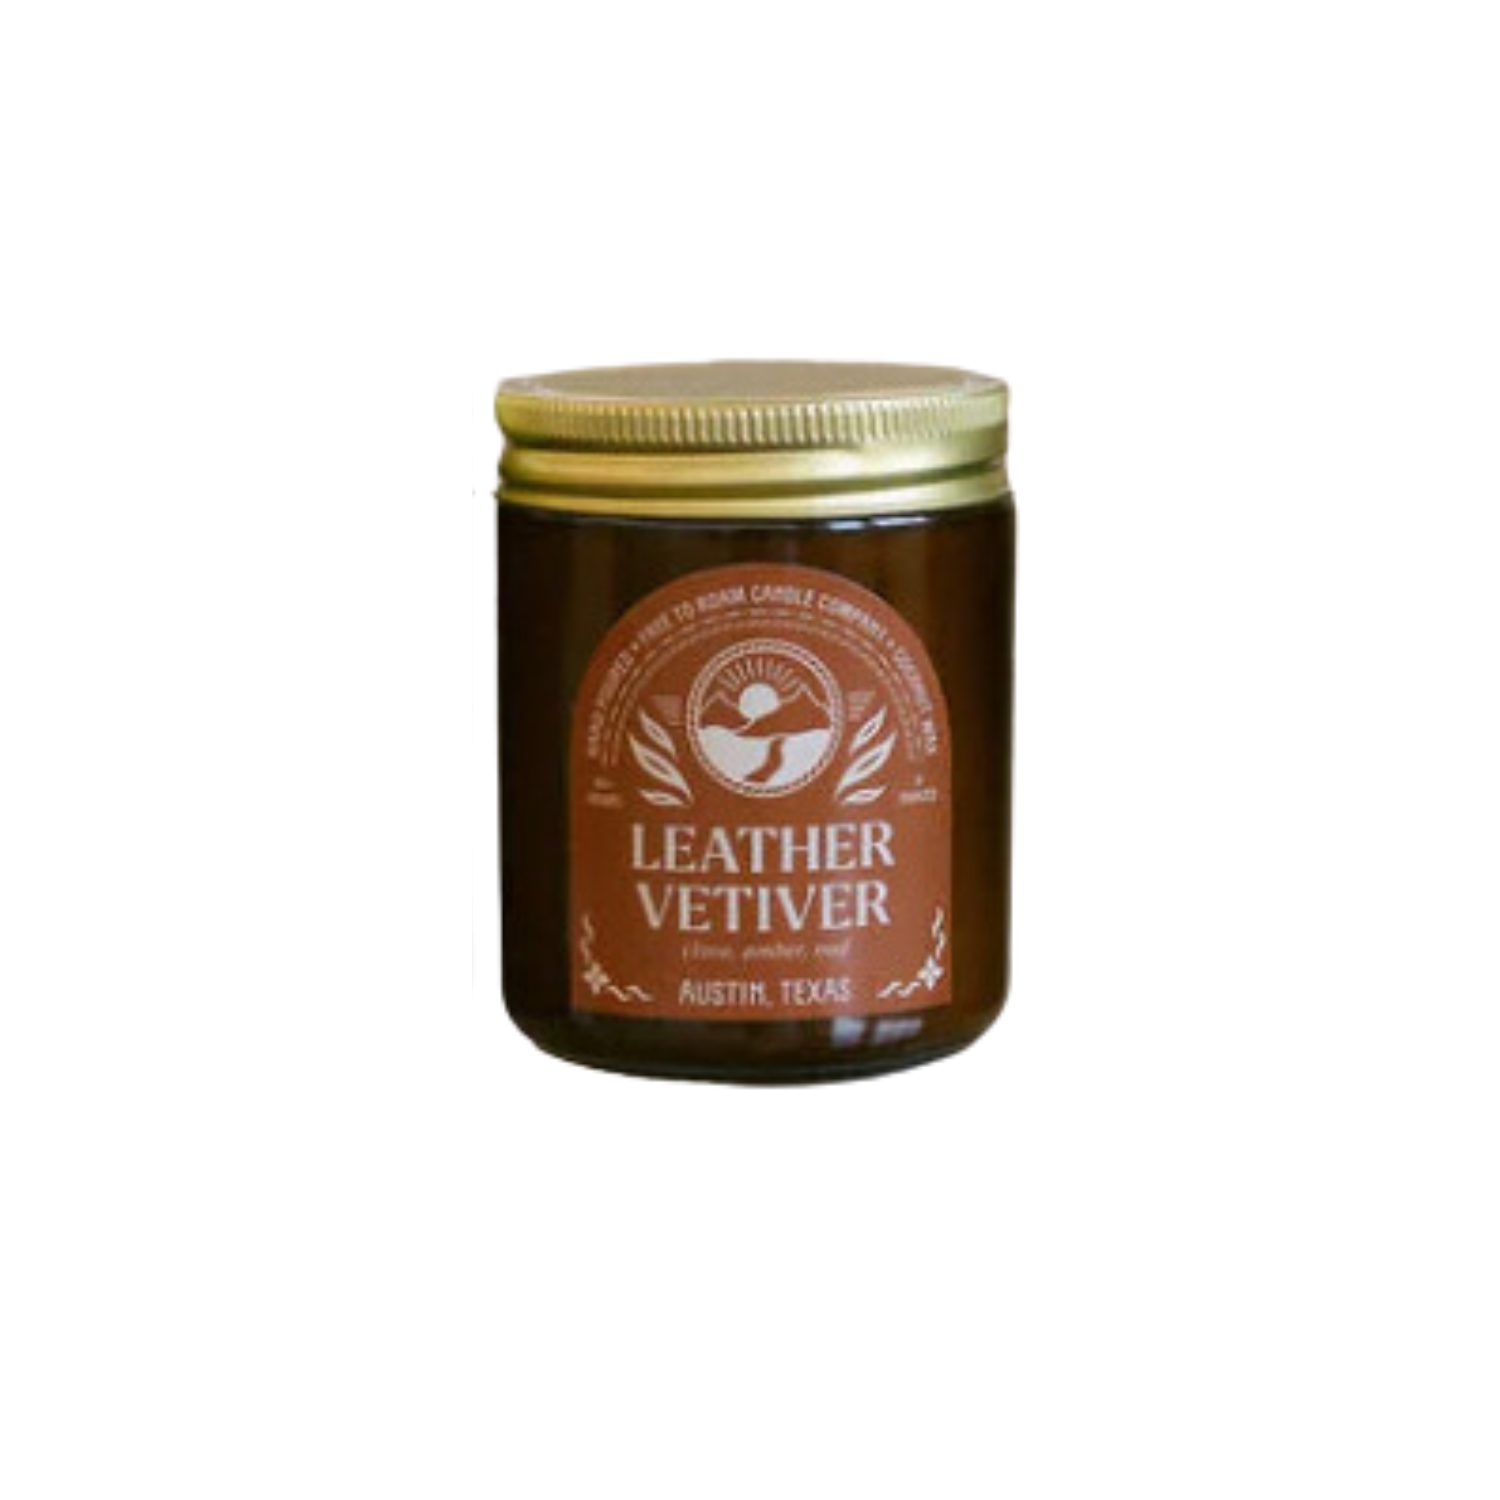 Leather and Vetiver Candle